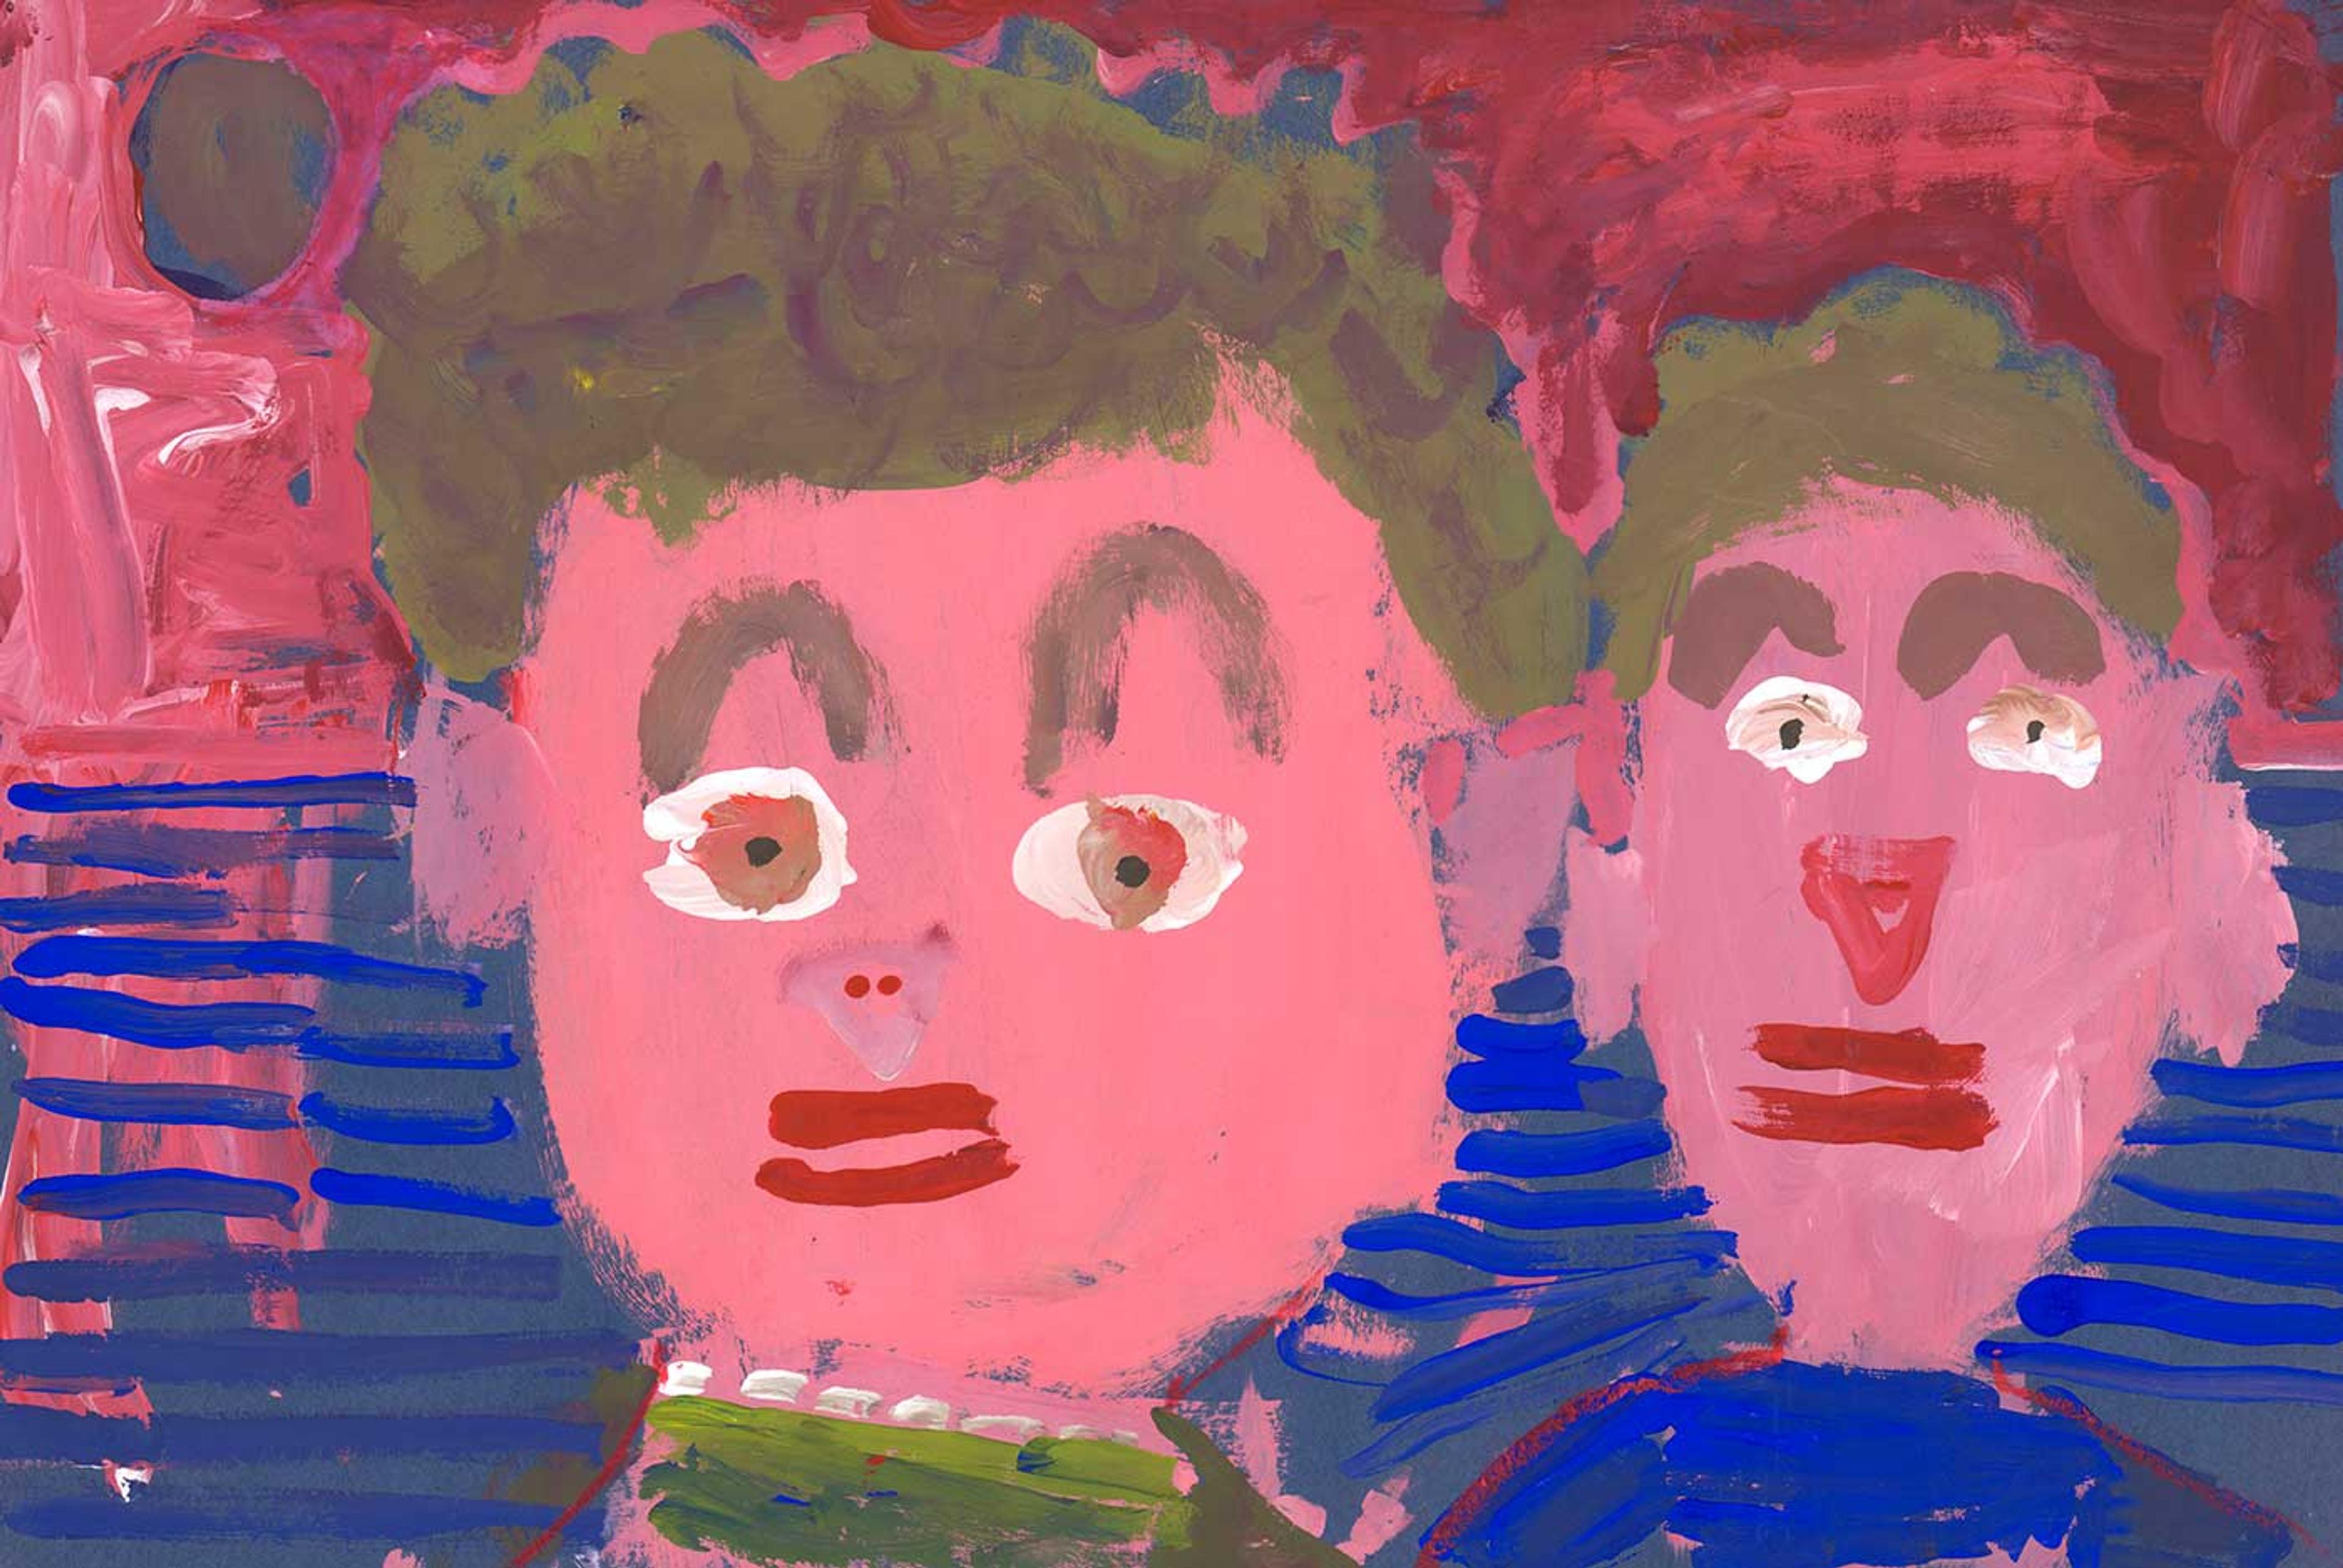 Portrait of two young boys with brown hair over a blue and pink background.